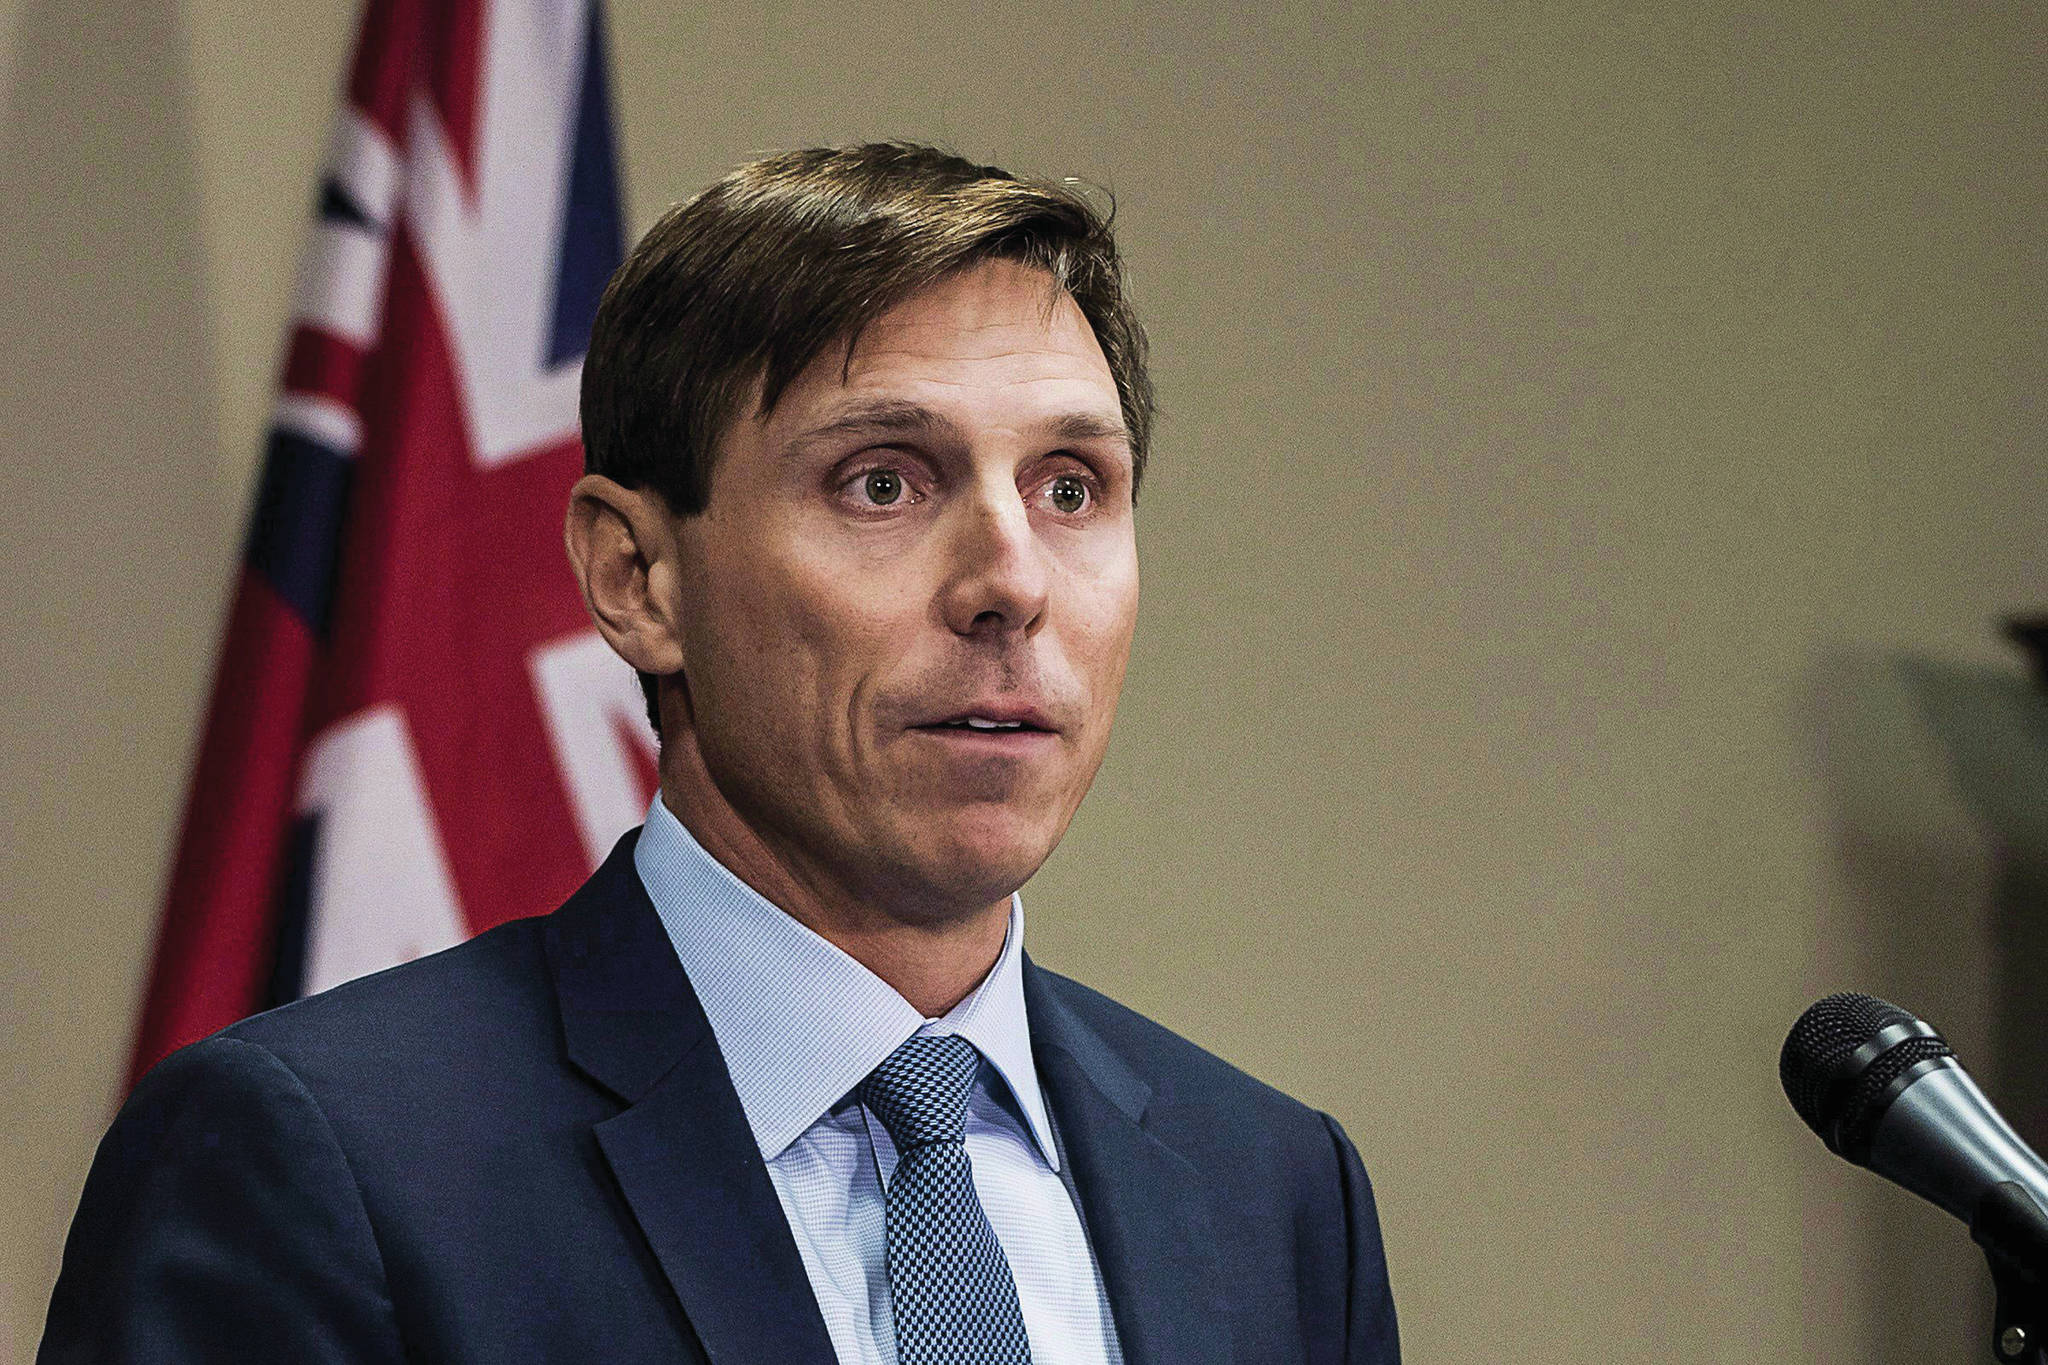 Ontario Progressive Conservative Leader Patrick Brown speaks at a press conference at Queen’s Park in Toronto on Wednesday, January 24, 2018. Brown broke his silence Tuesday, saying "the truth will come out" about the sexual misconduct allegations that prompted him to step down abruptly last month. THE CANADIAN PRESS/Aaron Vincent Elkaim